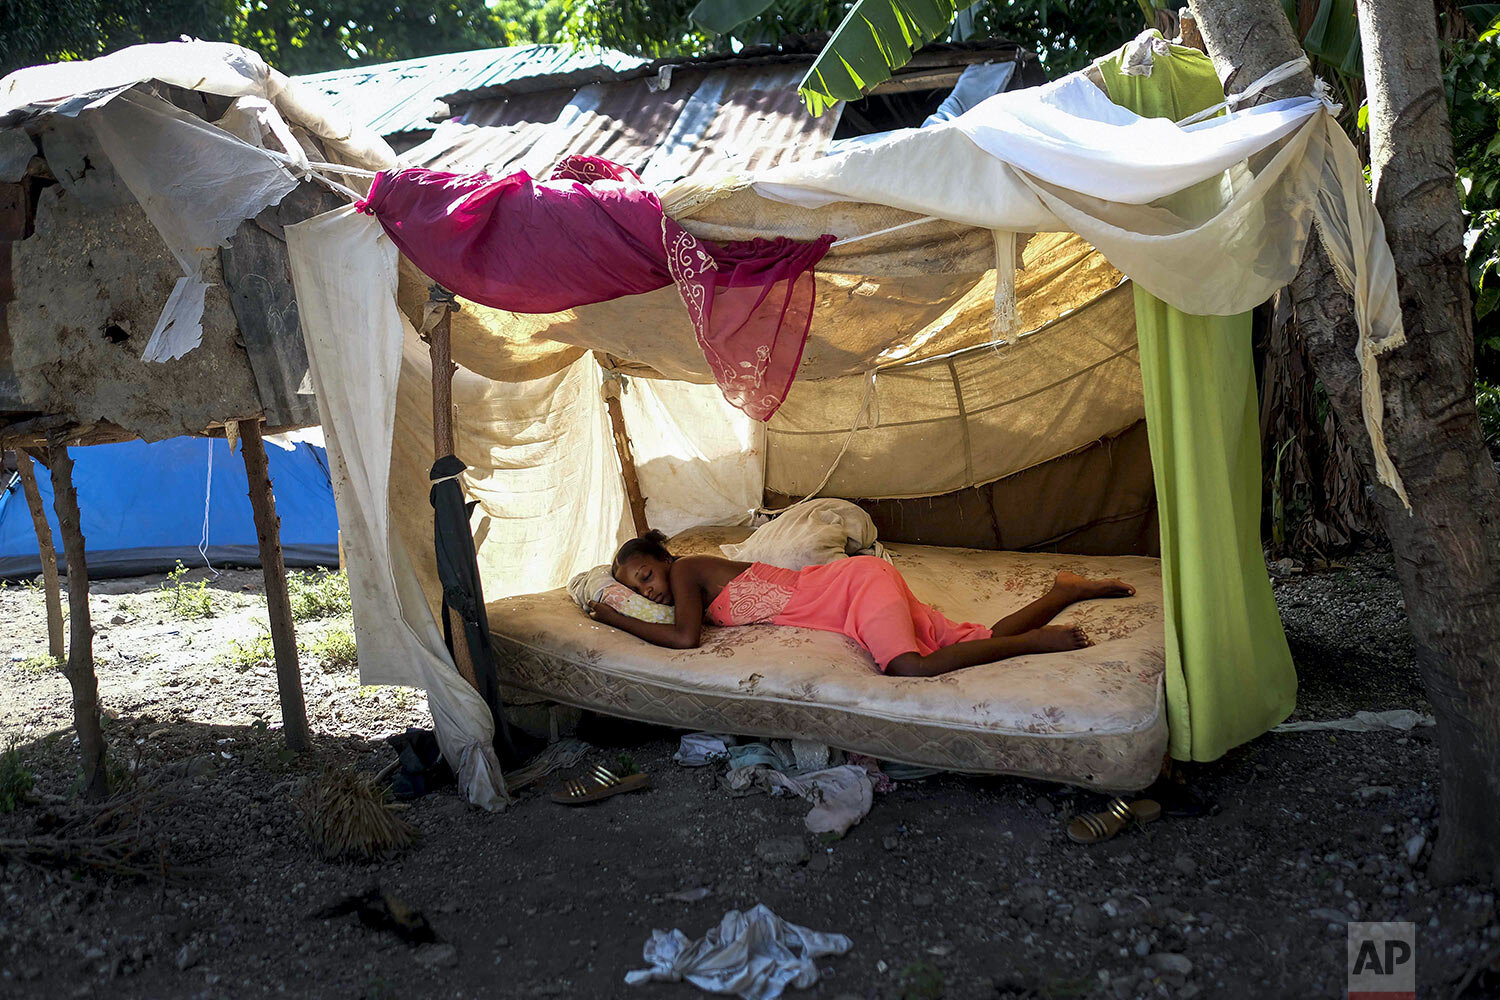  A youth sleeps outside her home in Saint-Louis-du-Sud, Haiti, Aug. 16, 2021, two days after a 7.2-magnitude earthquake struck. (AP Photo/Matias Delacroix) 